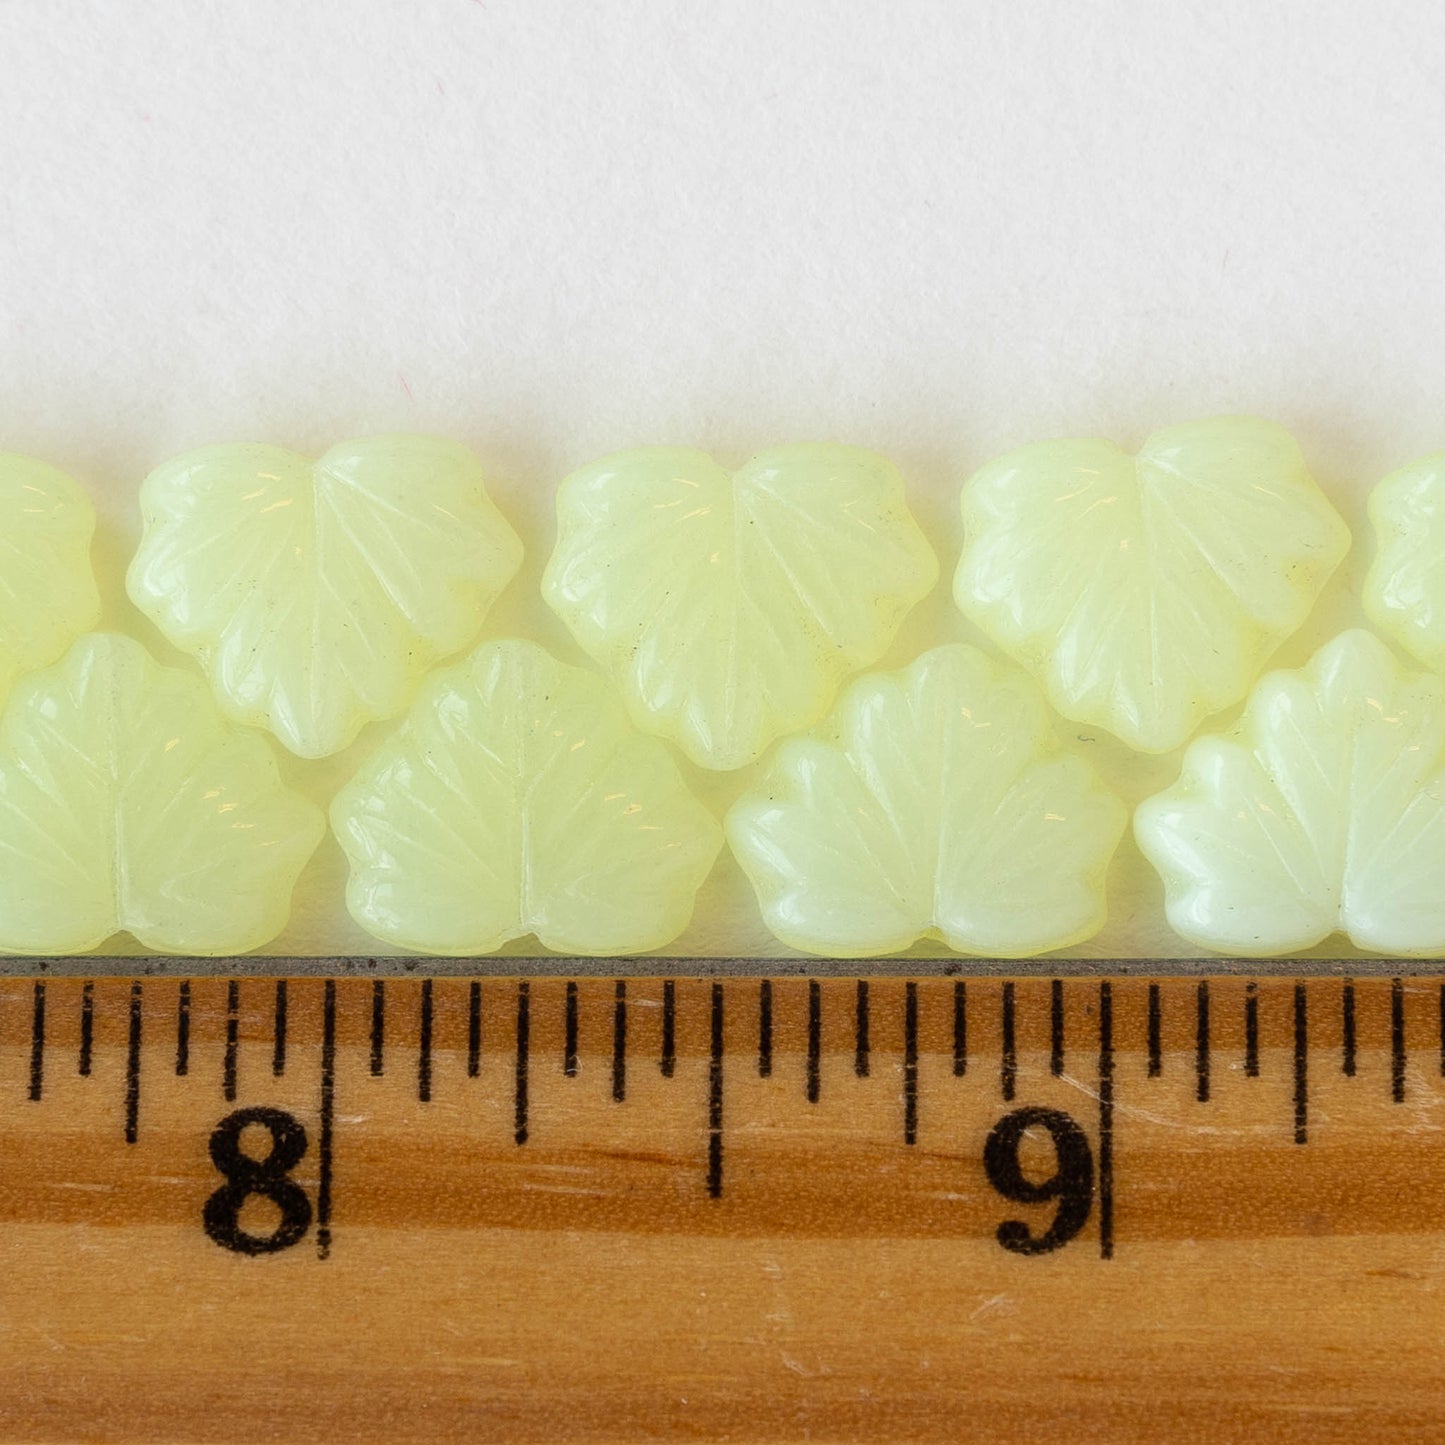 13mm Maple Leaf Beads -  Jonquil Yellow  - 10 or 20 Beads